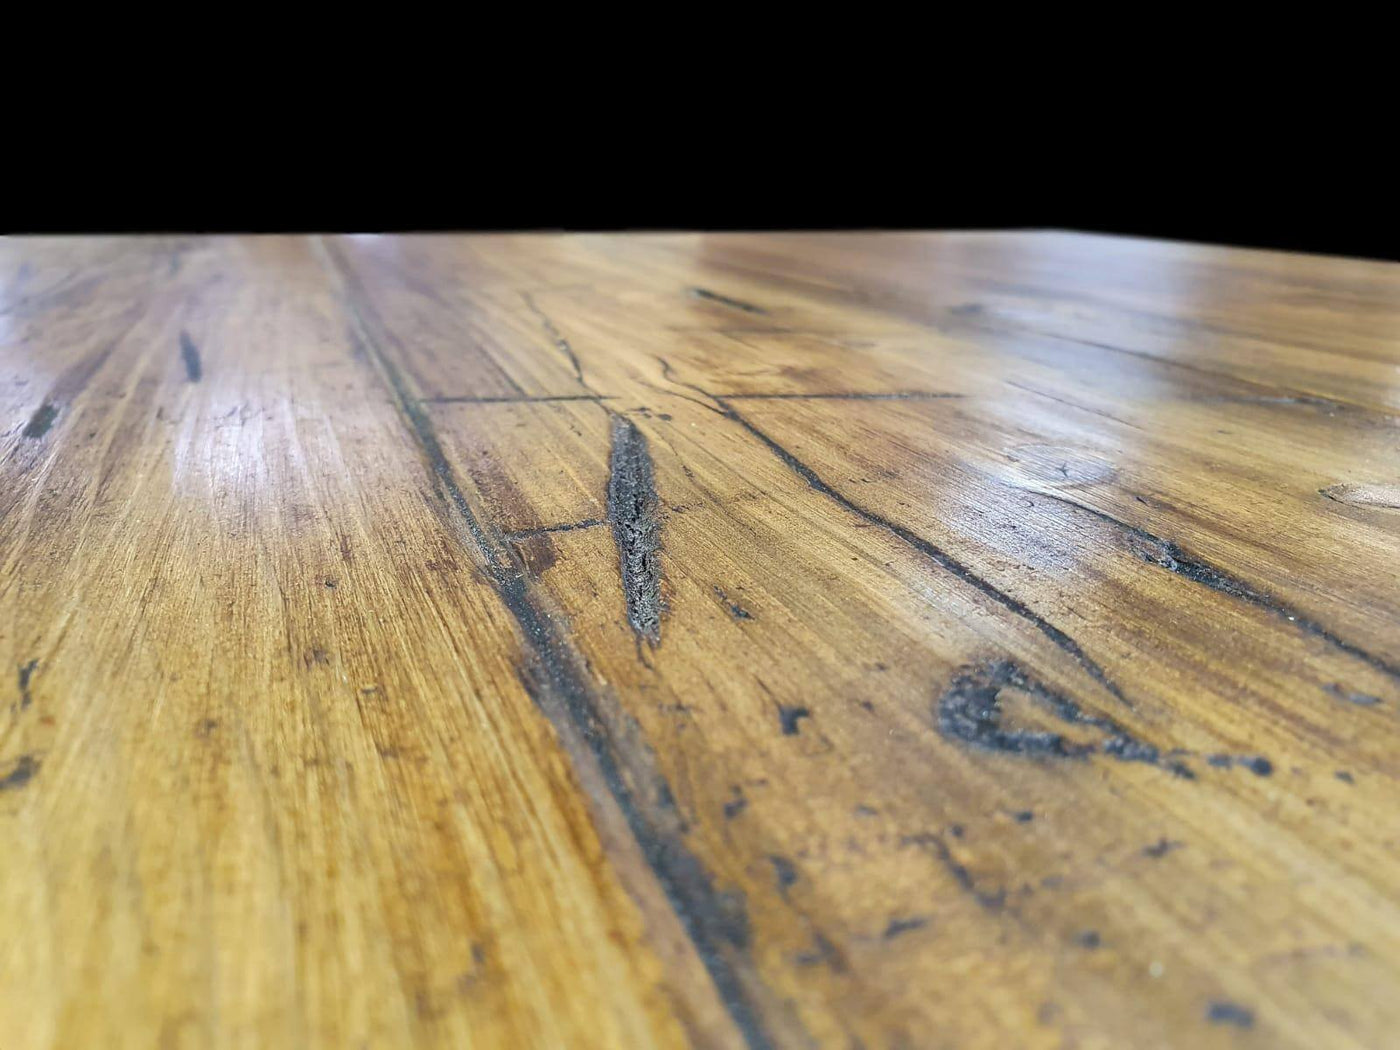 The 65mm Reclaimed Rustic Weathered Table - Oil Finish (4632992907319)